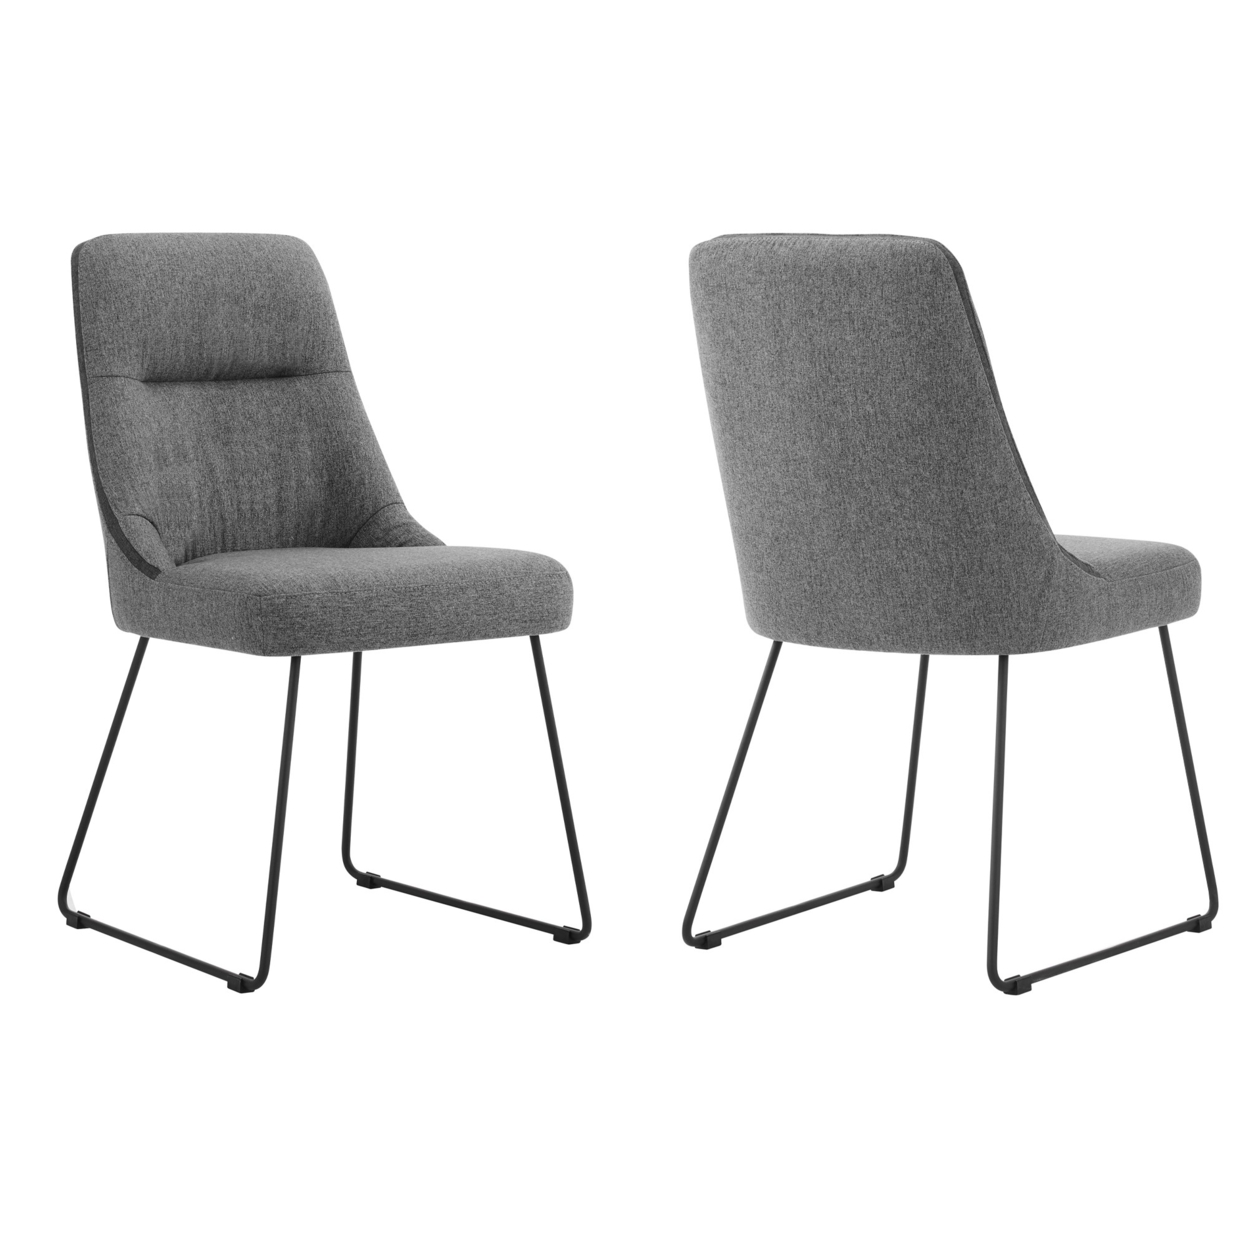 Tufted Fabric Dining Chair With Metal Sled Base, Set Of 2, Gray And Black- Saltoro Sherpi